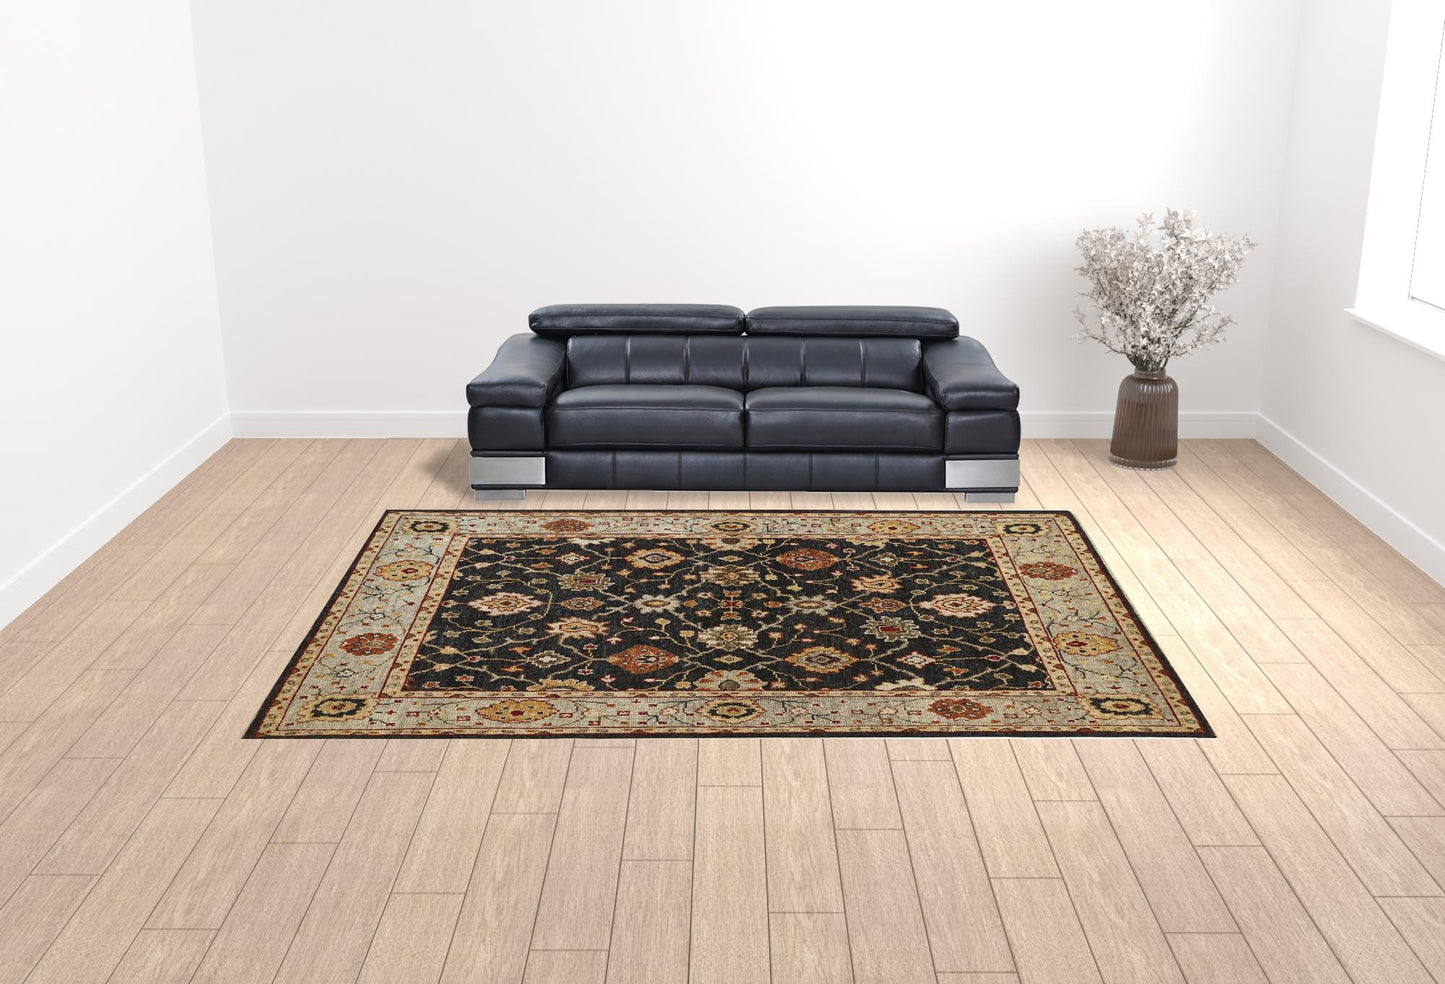 8' X 10' Black Gold And Gray Wool Floral Hand Knotted Stain Resistant Area Rug With Fringe